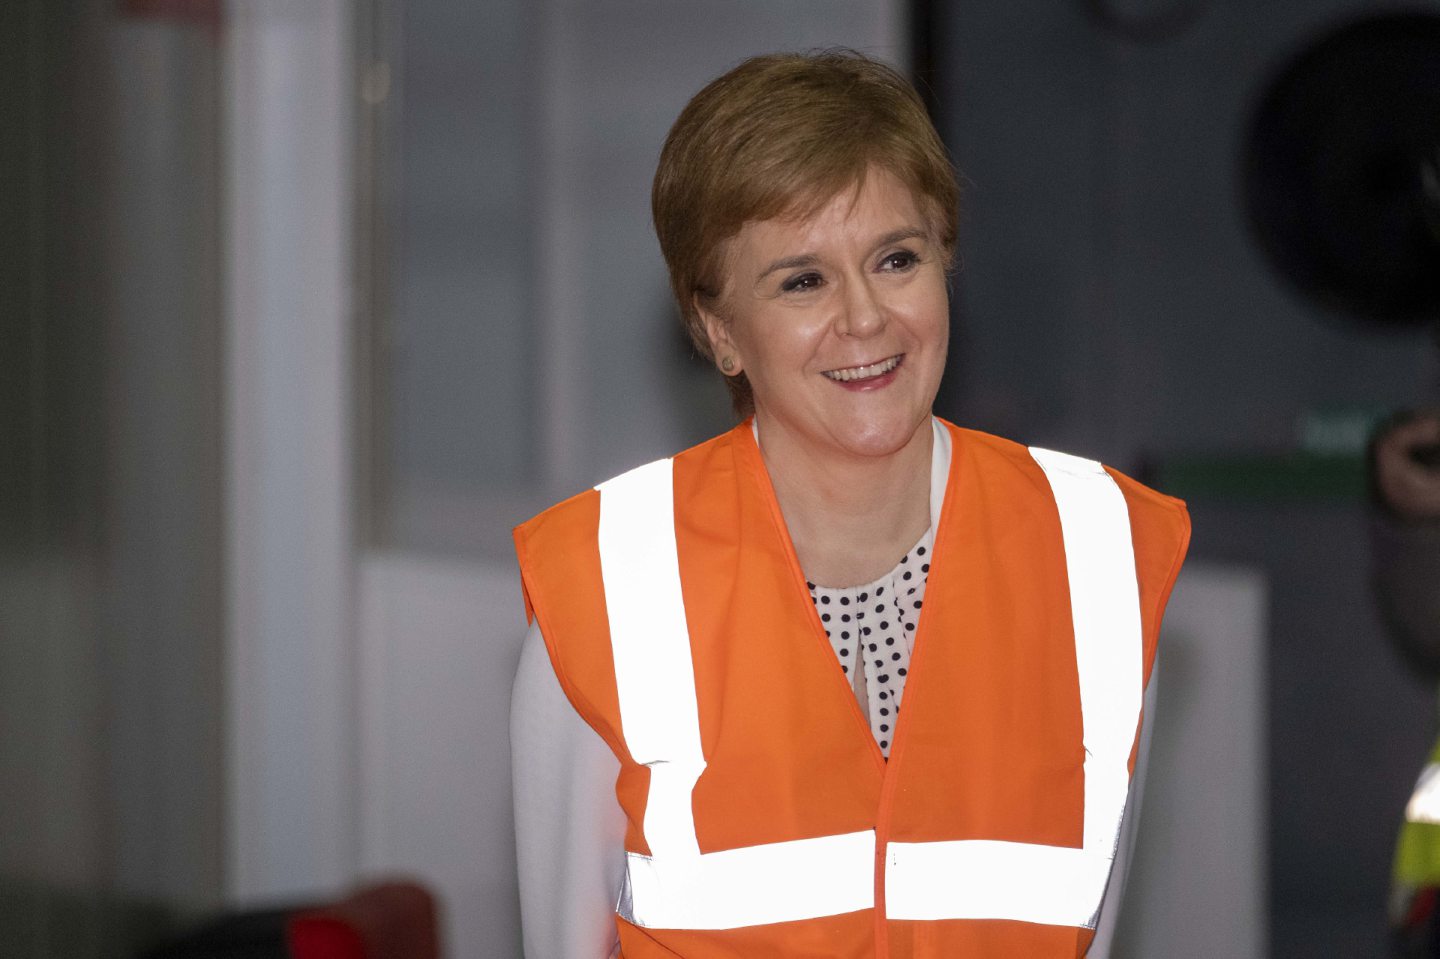 Nicola Sturgeon says she finds Janey Godley's work very funny.